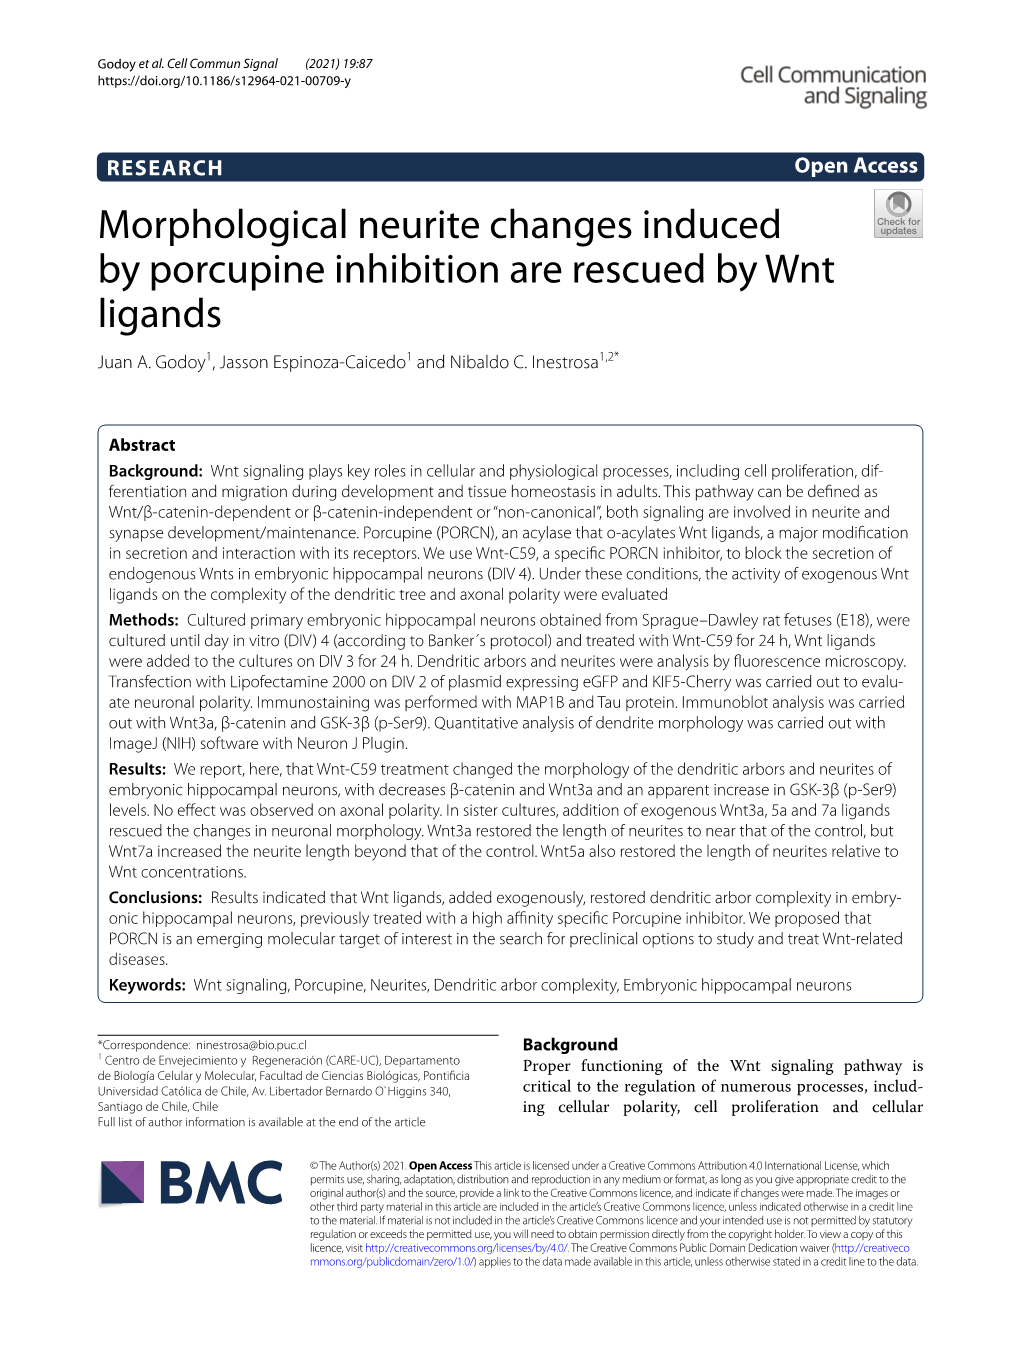 Morphological Neurite Changes Induced by Porcupine Inhibition Are Rescued by Wnt Ligands Juan A